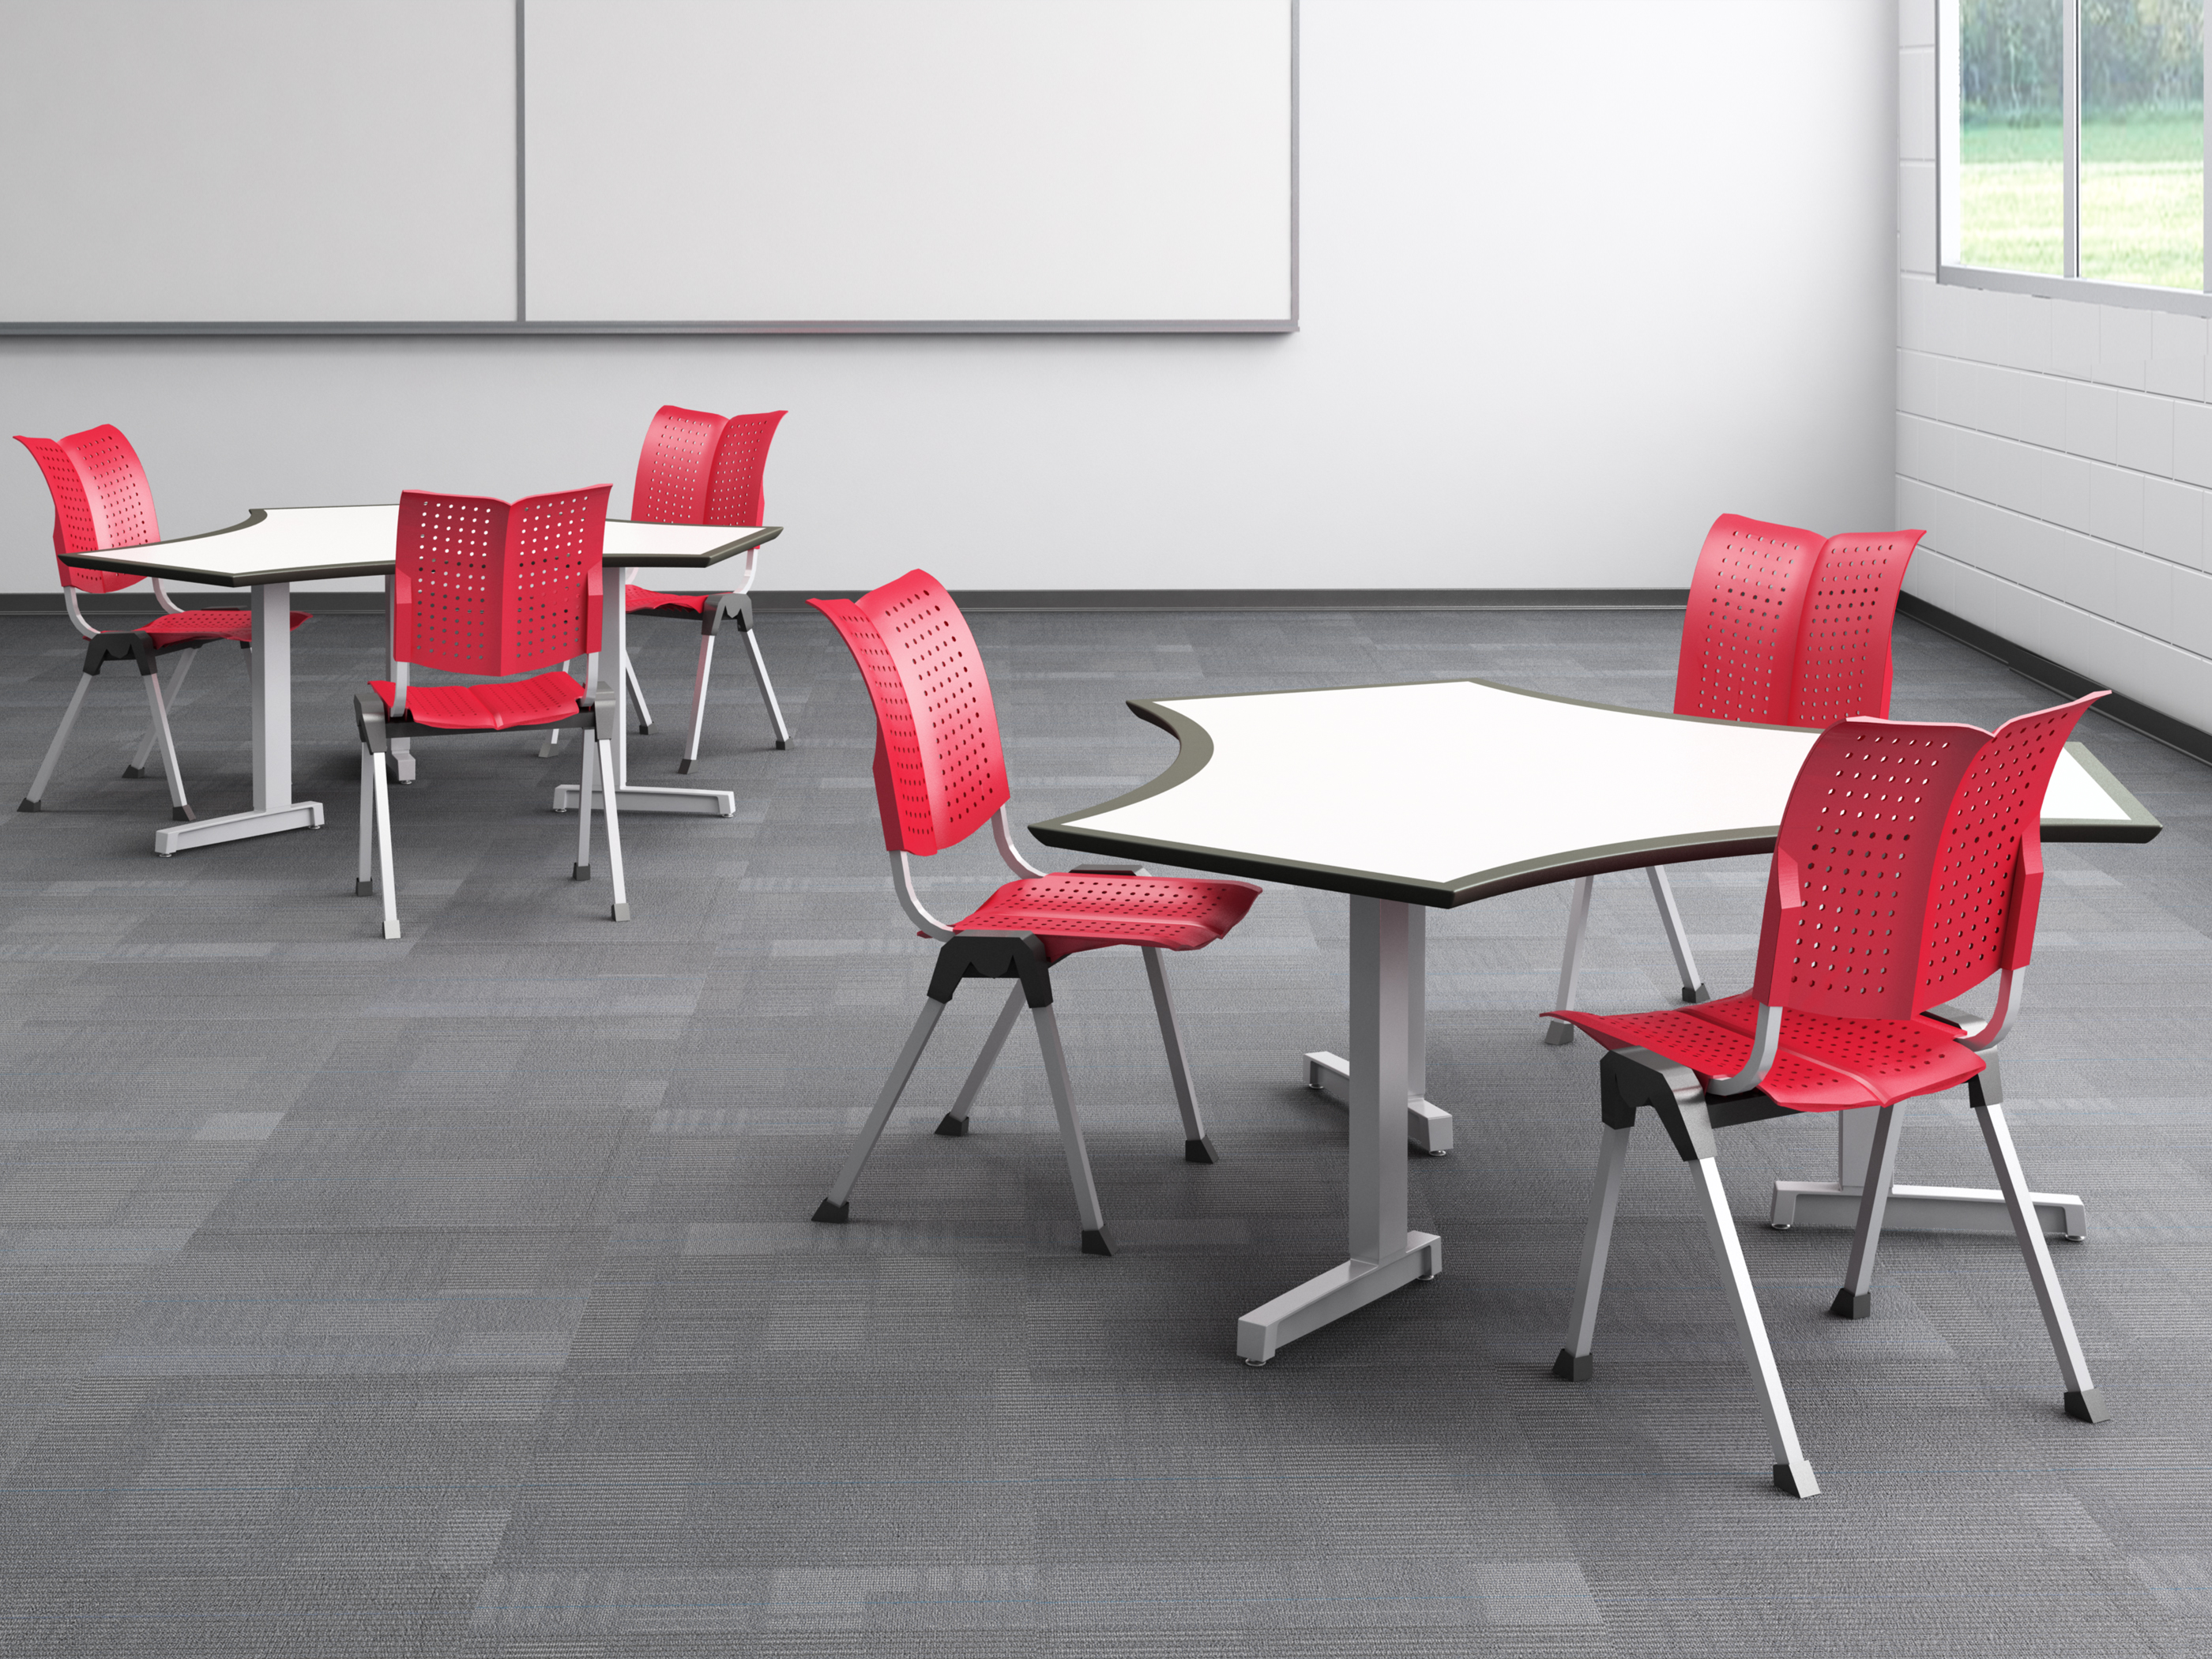 Dewey by Surfaceworks two six-sided tables with red chairs